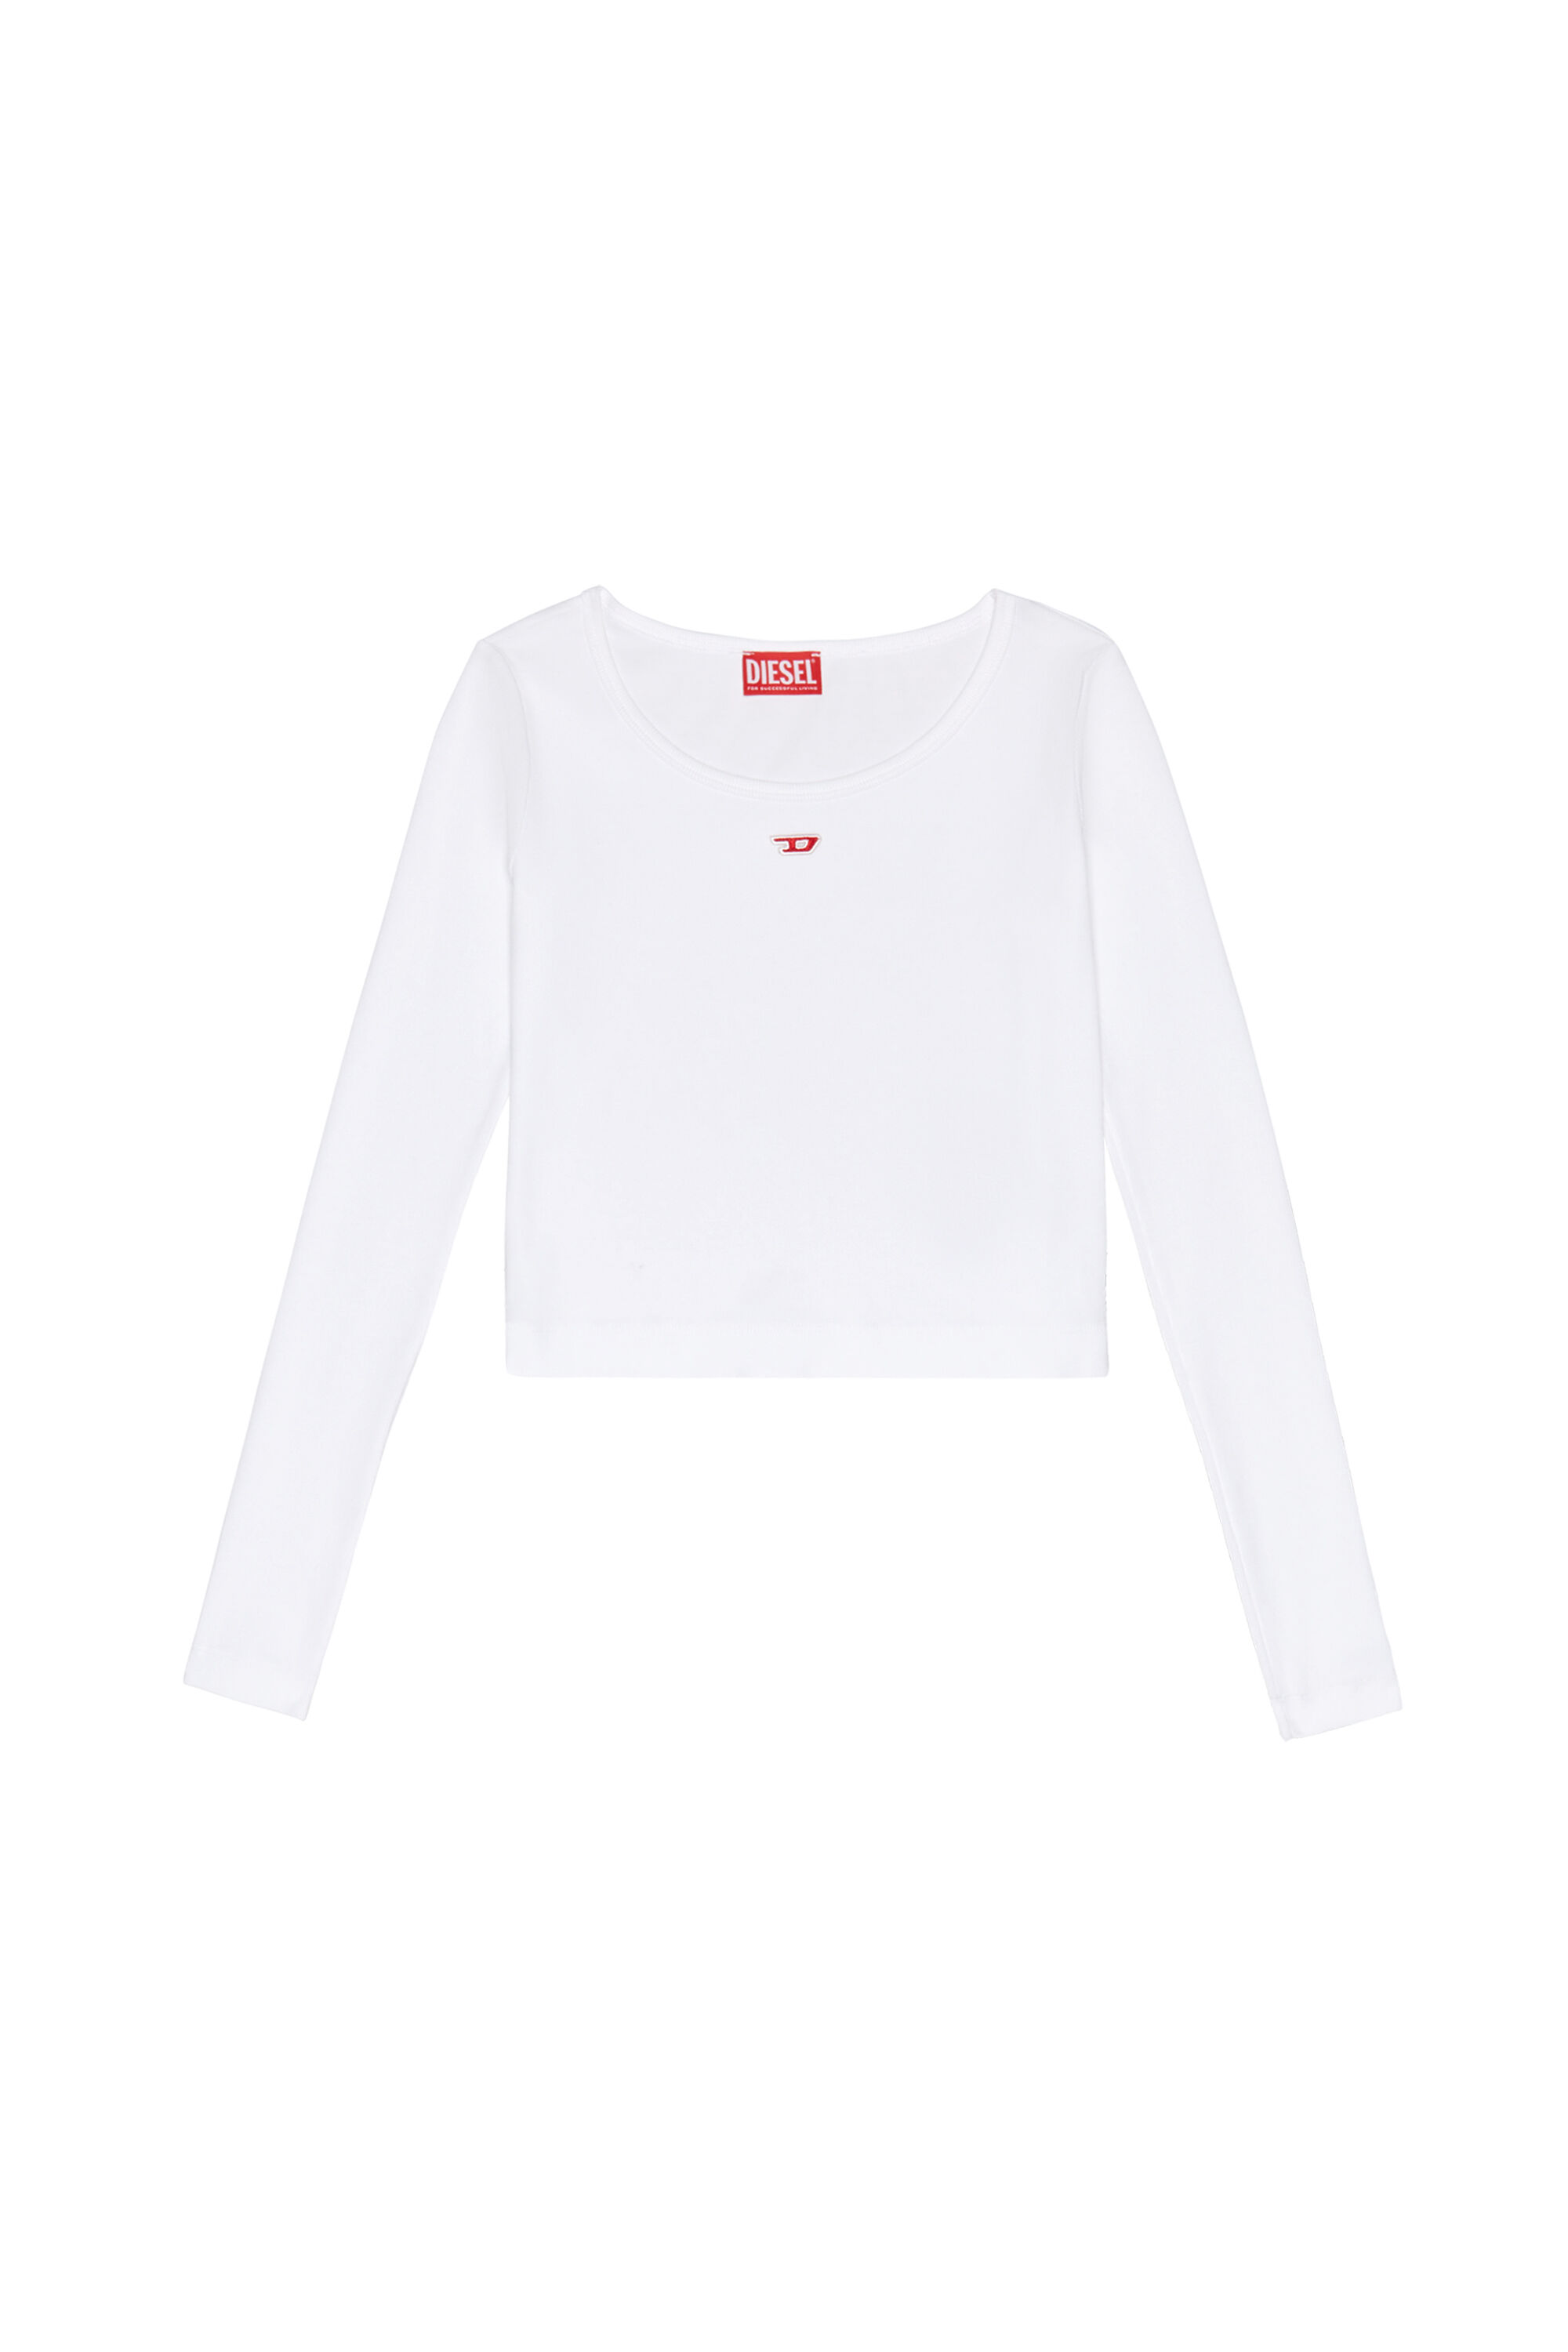 T-BALLET-D Woman: Long-sleeve top with embroidered D patch | Diesel